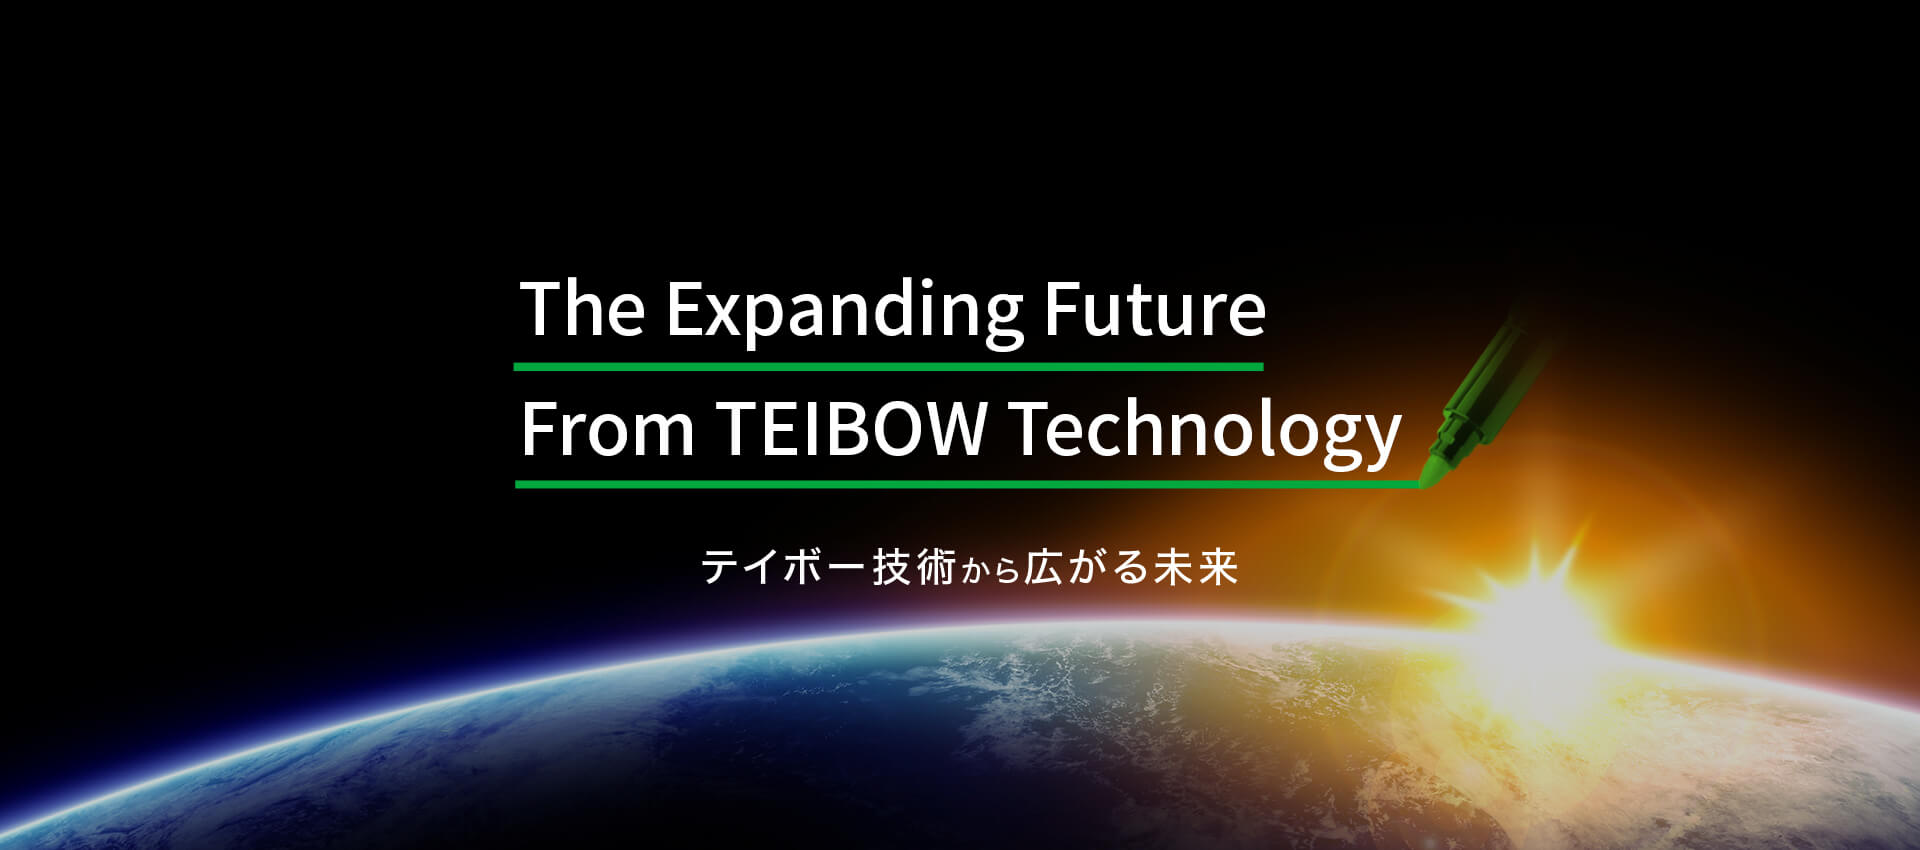 The Expanding Future From TEIBOW Technology テイボー技術から広がる未来